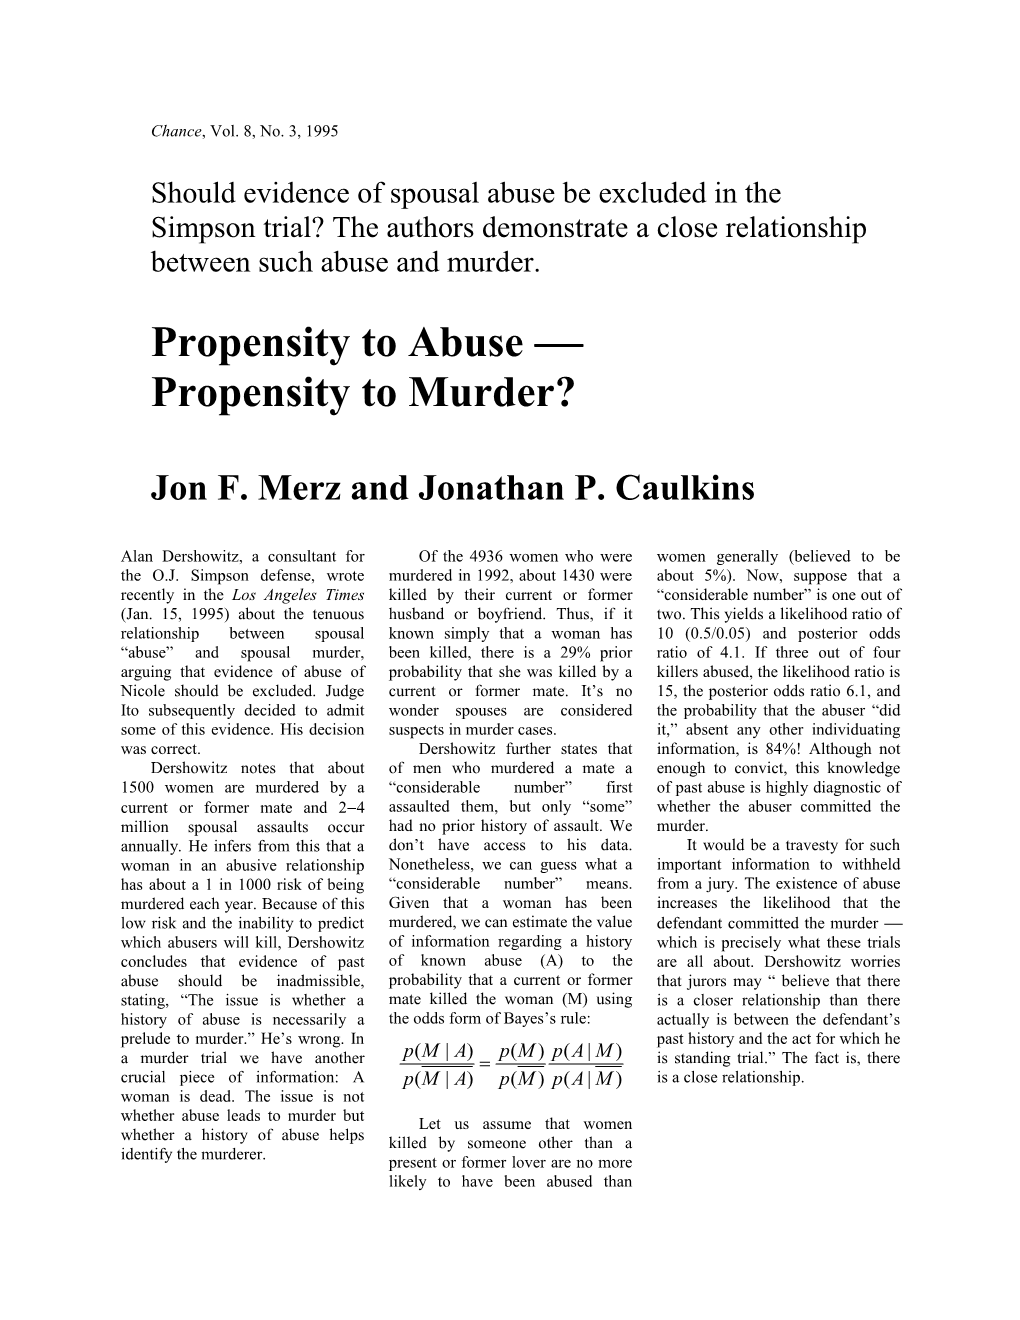 Propensity to Abuse